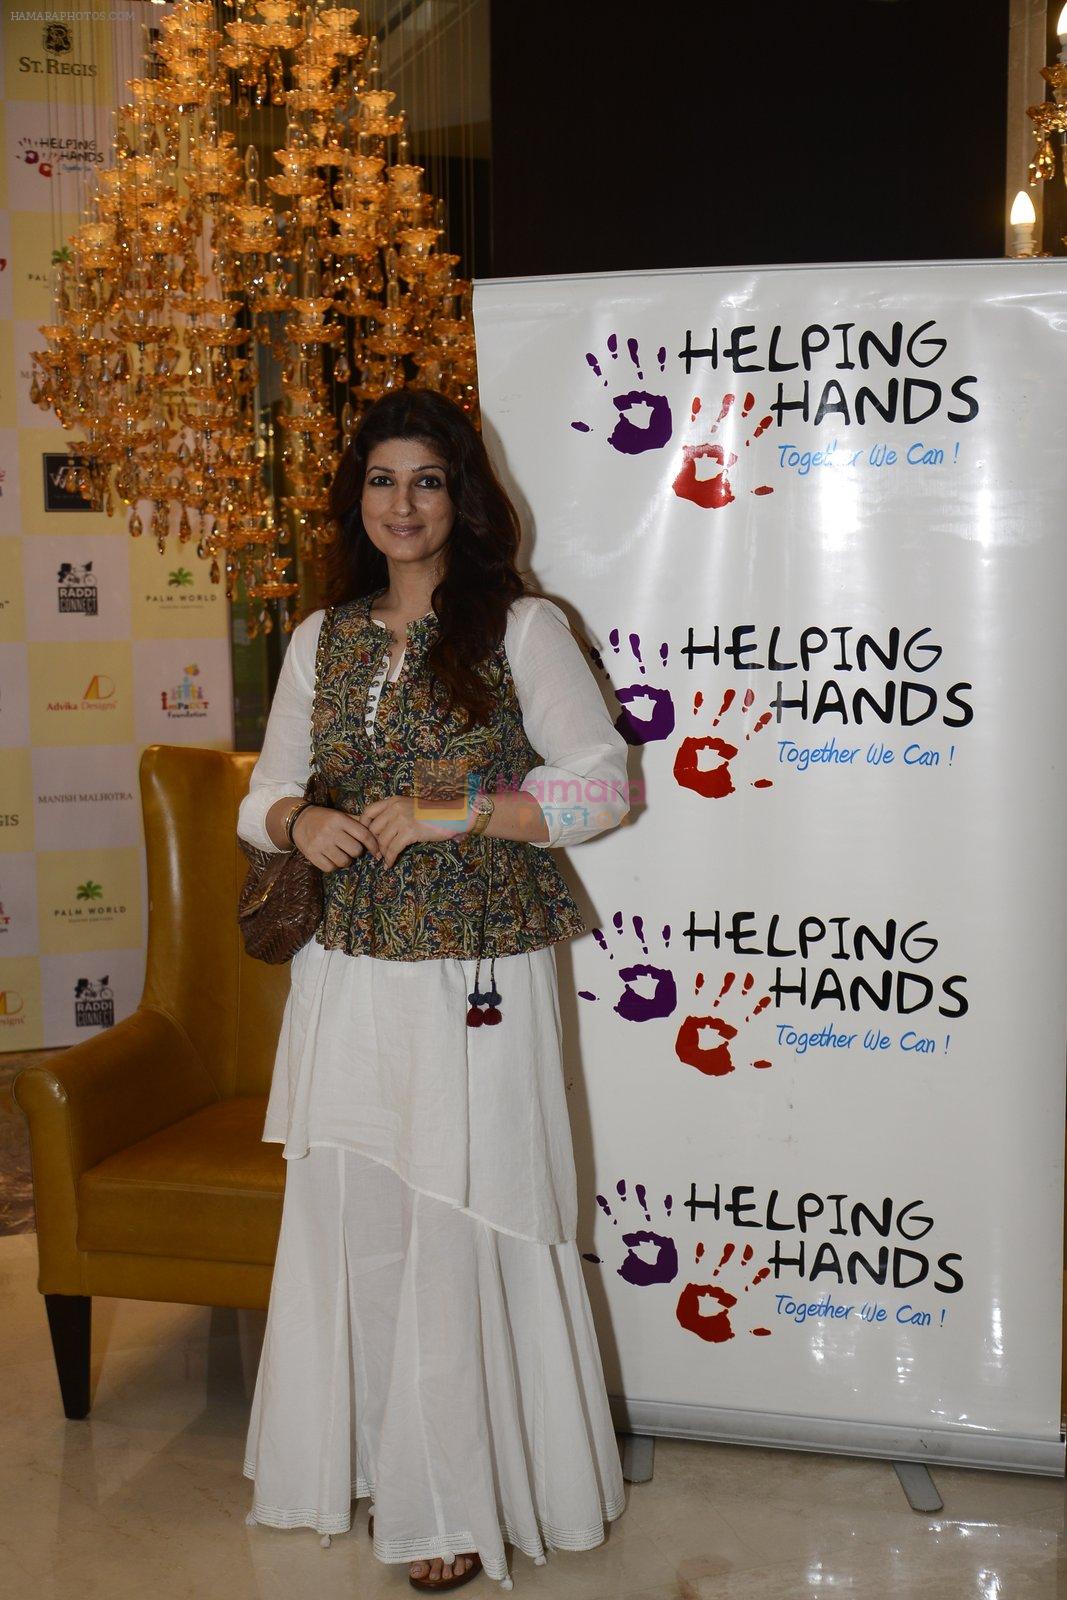 Twinkle khanna innaugurate helping hands exhibition in st regis on 13th Oct 2016